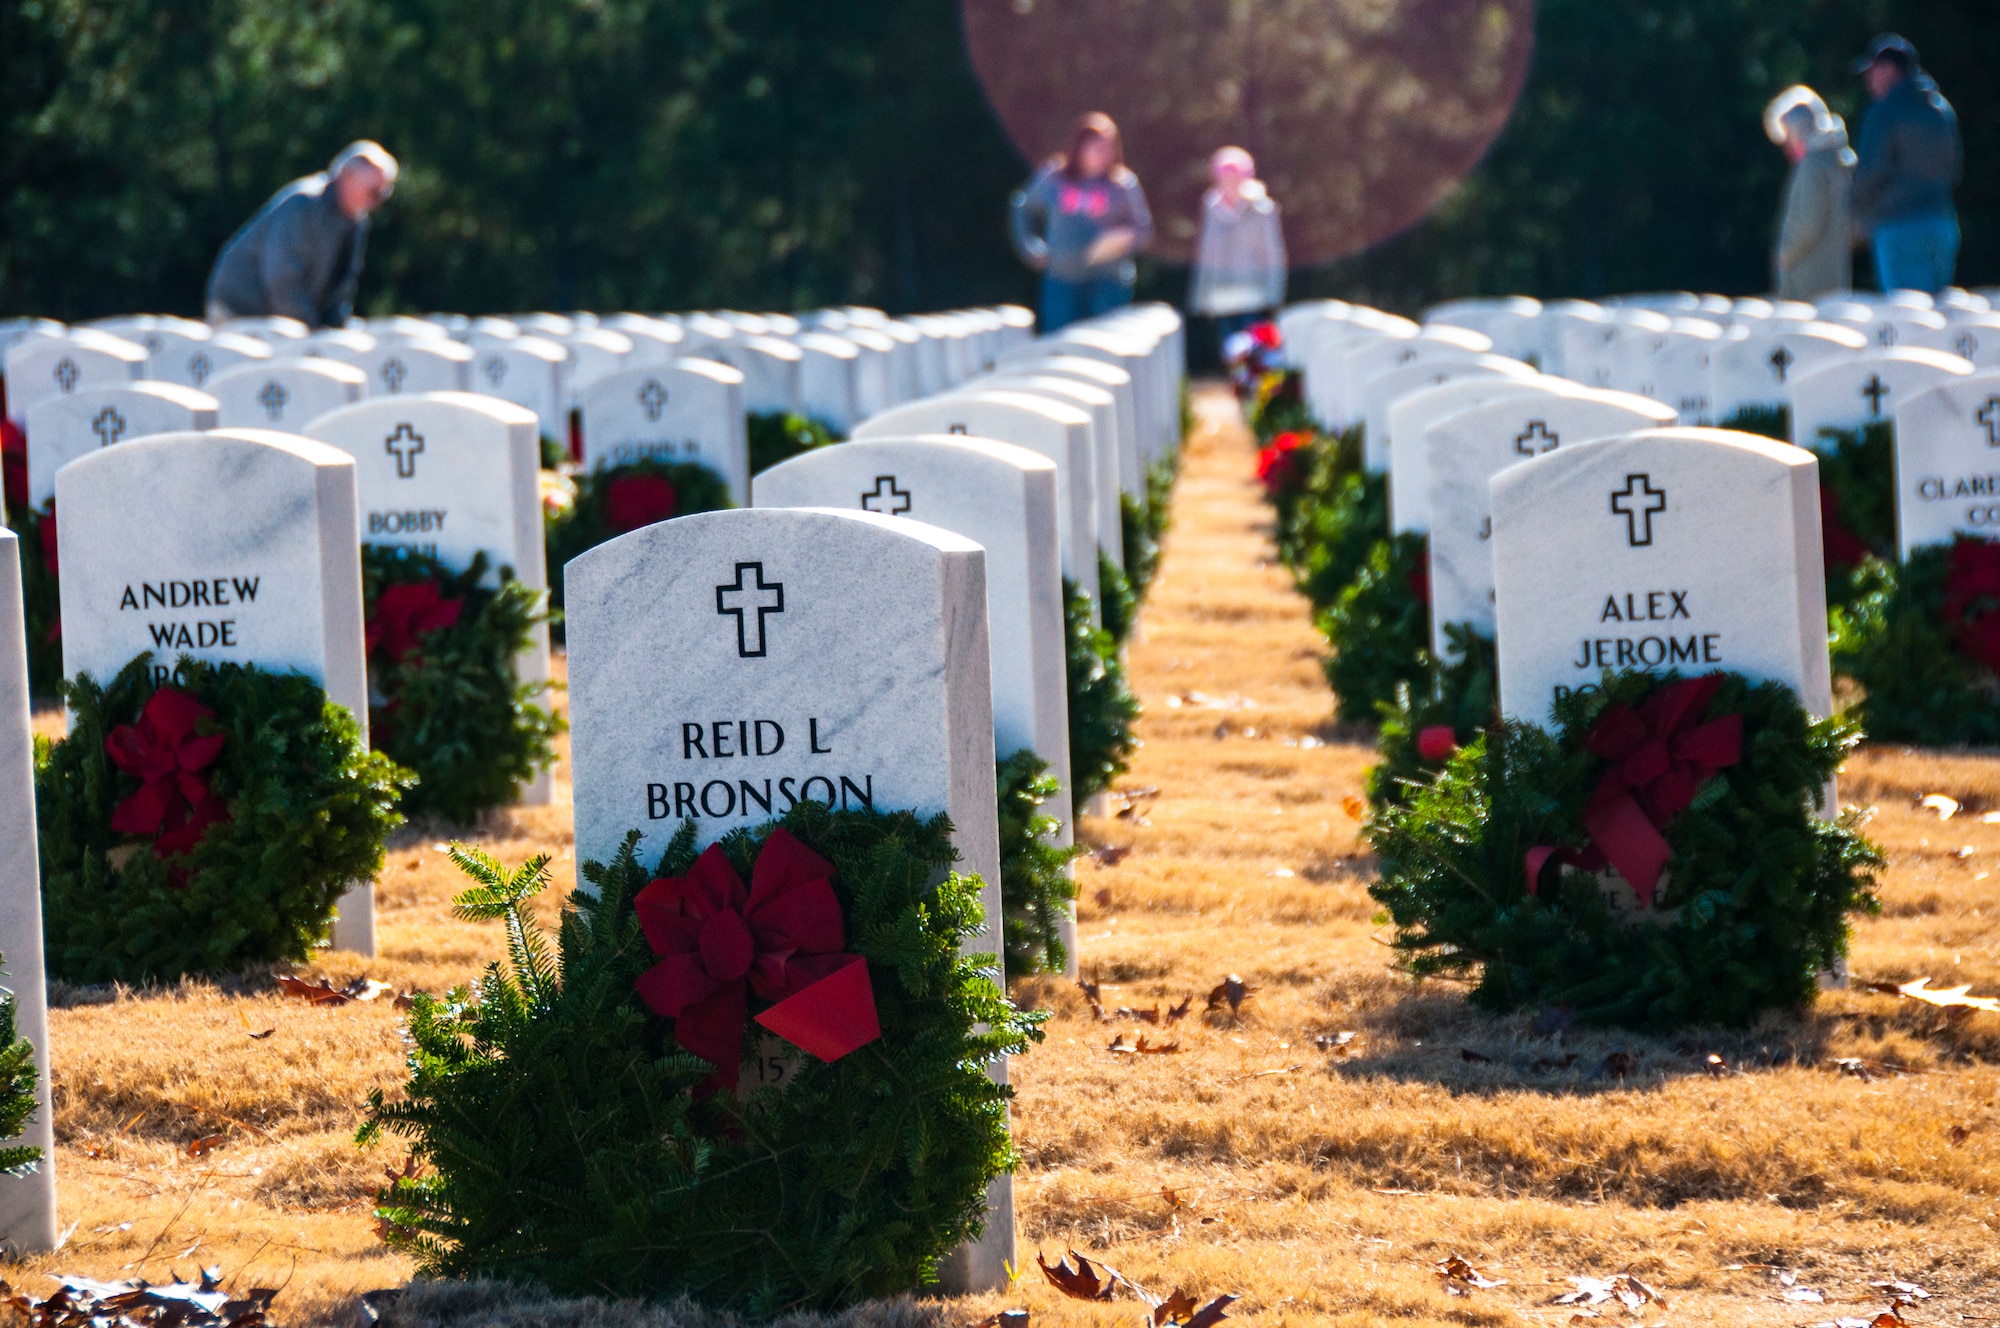 Wreaths lay on gravestones after the Wreaths Across America ceremony at Georgia National Cemetery in Canton, Ga. Dec. 13, 2014. Wreaths Across America occurs the second Saturday of December every year. (U.S. Air Force photo/Senior Airman Daniel Phelps)